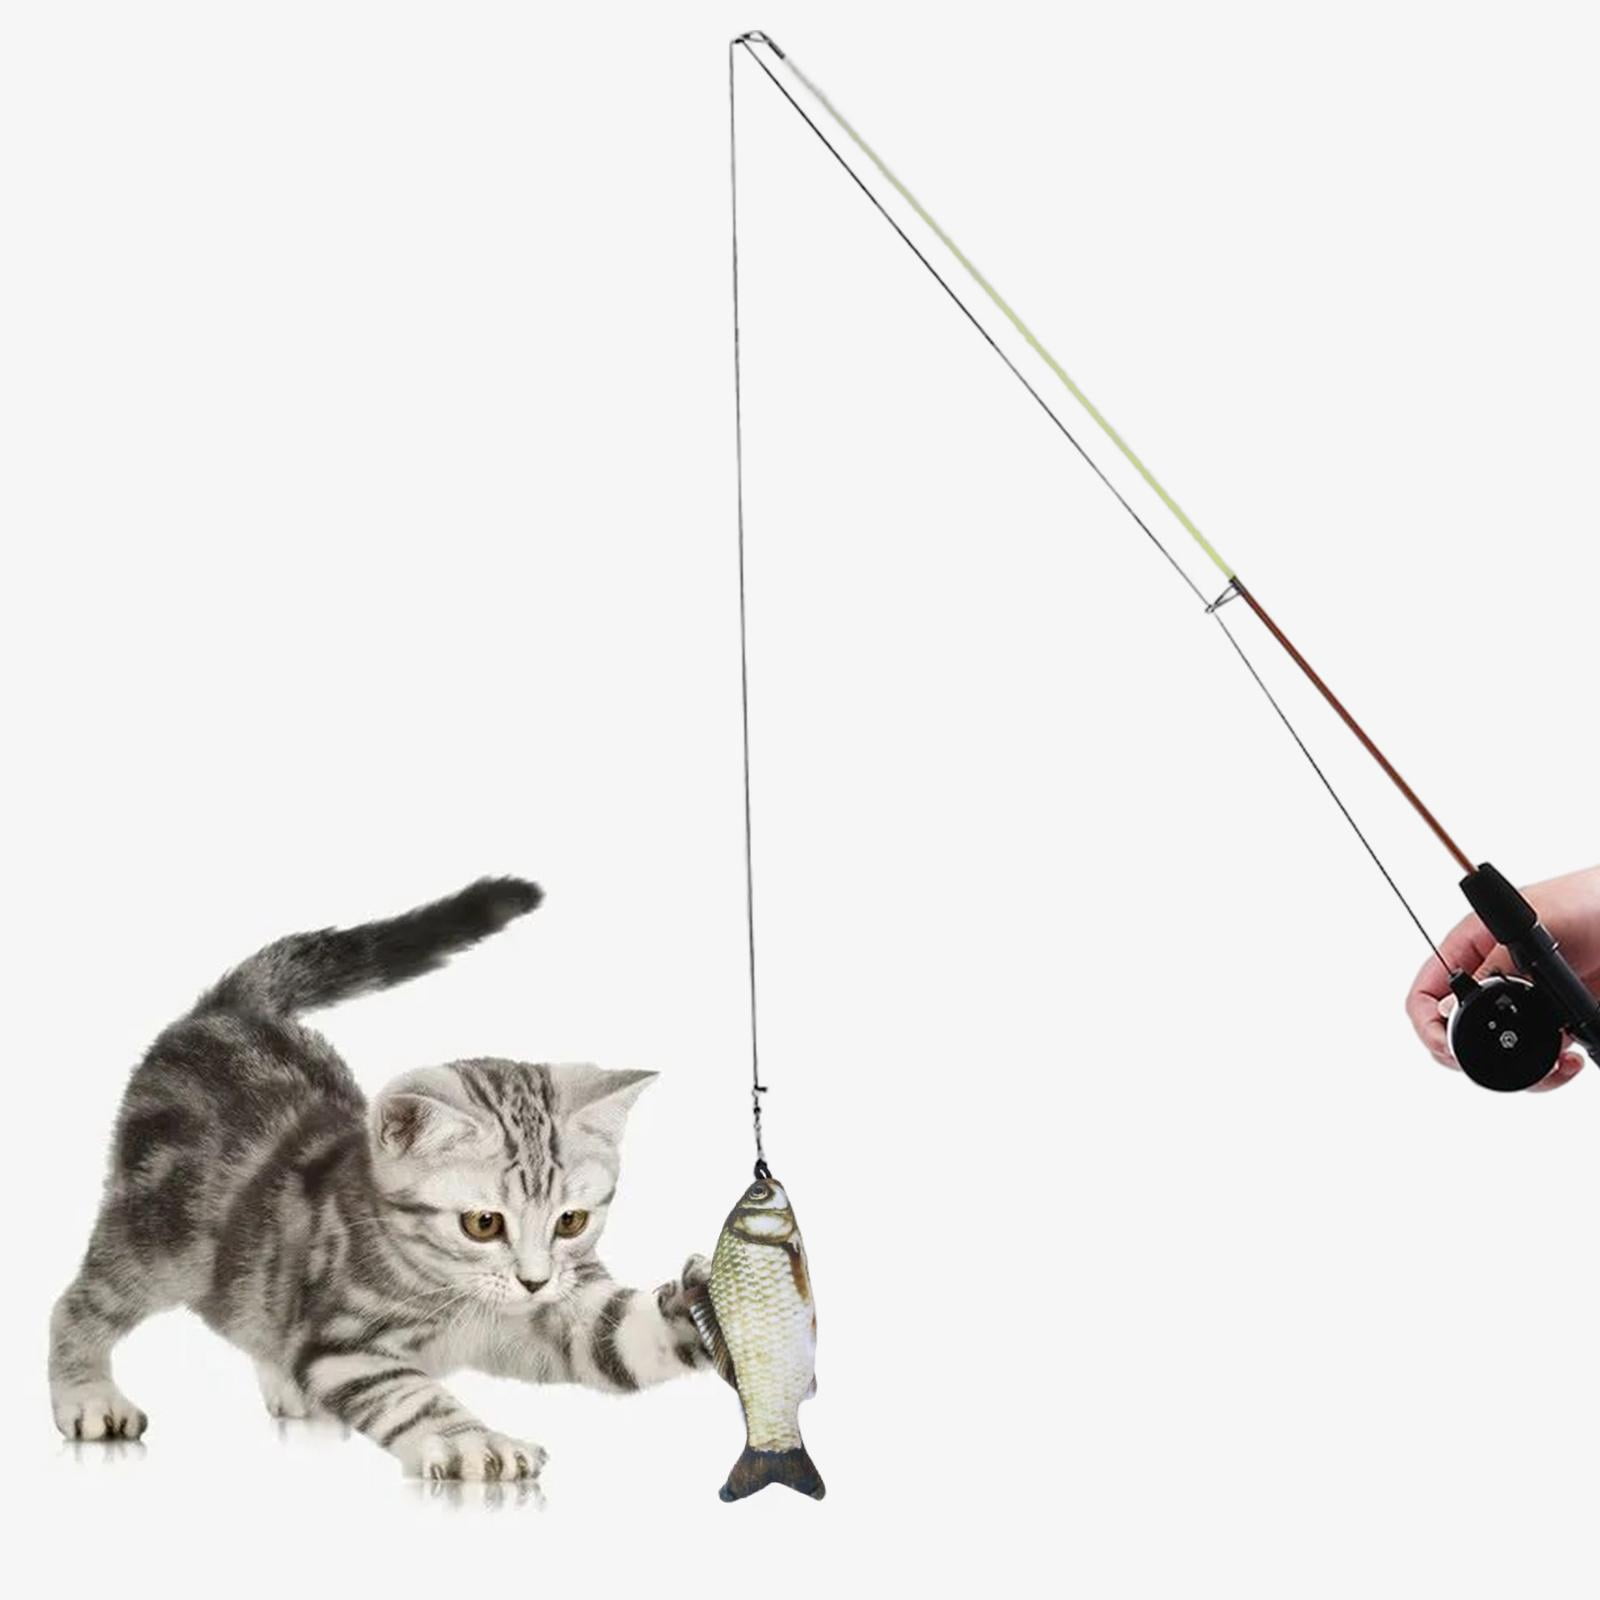 Cat Caster Fishing Pole Toy | Tangle Free, Retractable & Easy to Store.  Includes Two Interchangeable Teaser Toys | The Ultimate Gift for Kitty  Lovers